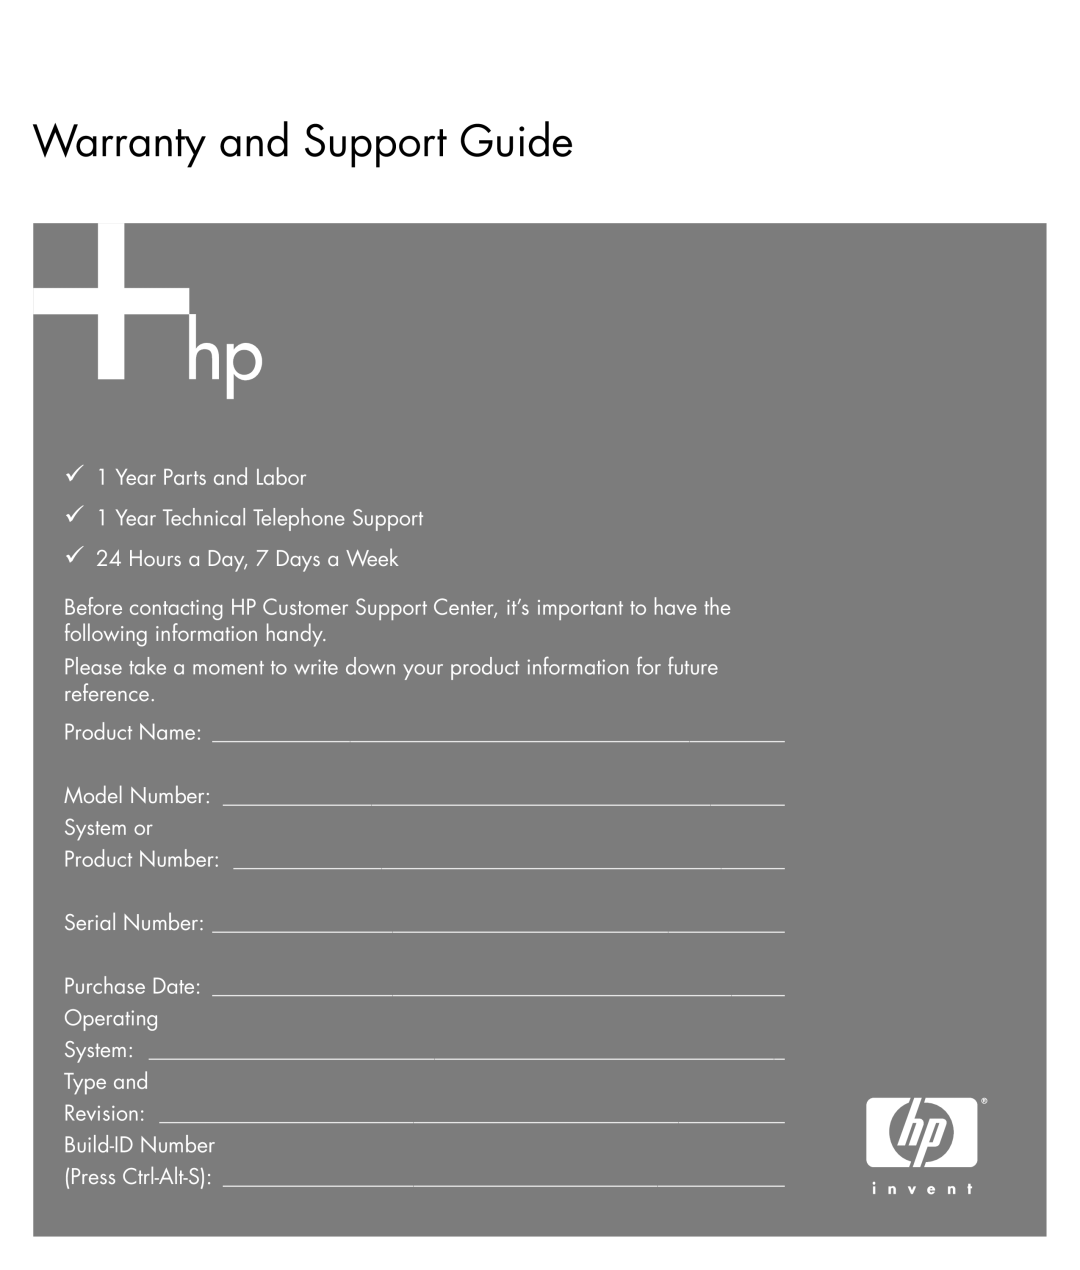 HP a1173w, a1163w, a1140n, a1133w, a1102n, a1104x, a1106n manual My HP Pavilion PC, Get the most out of your new HP Pavilion PC 